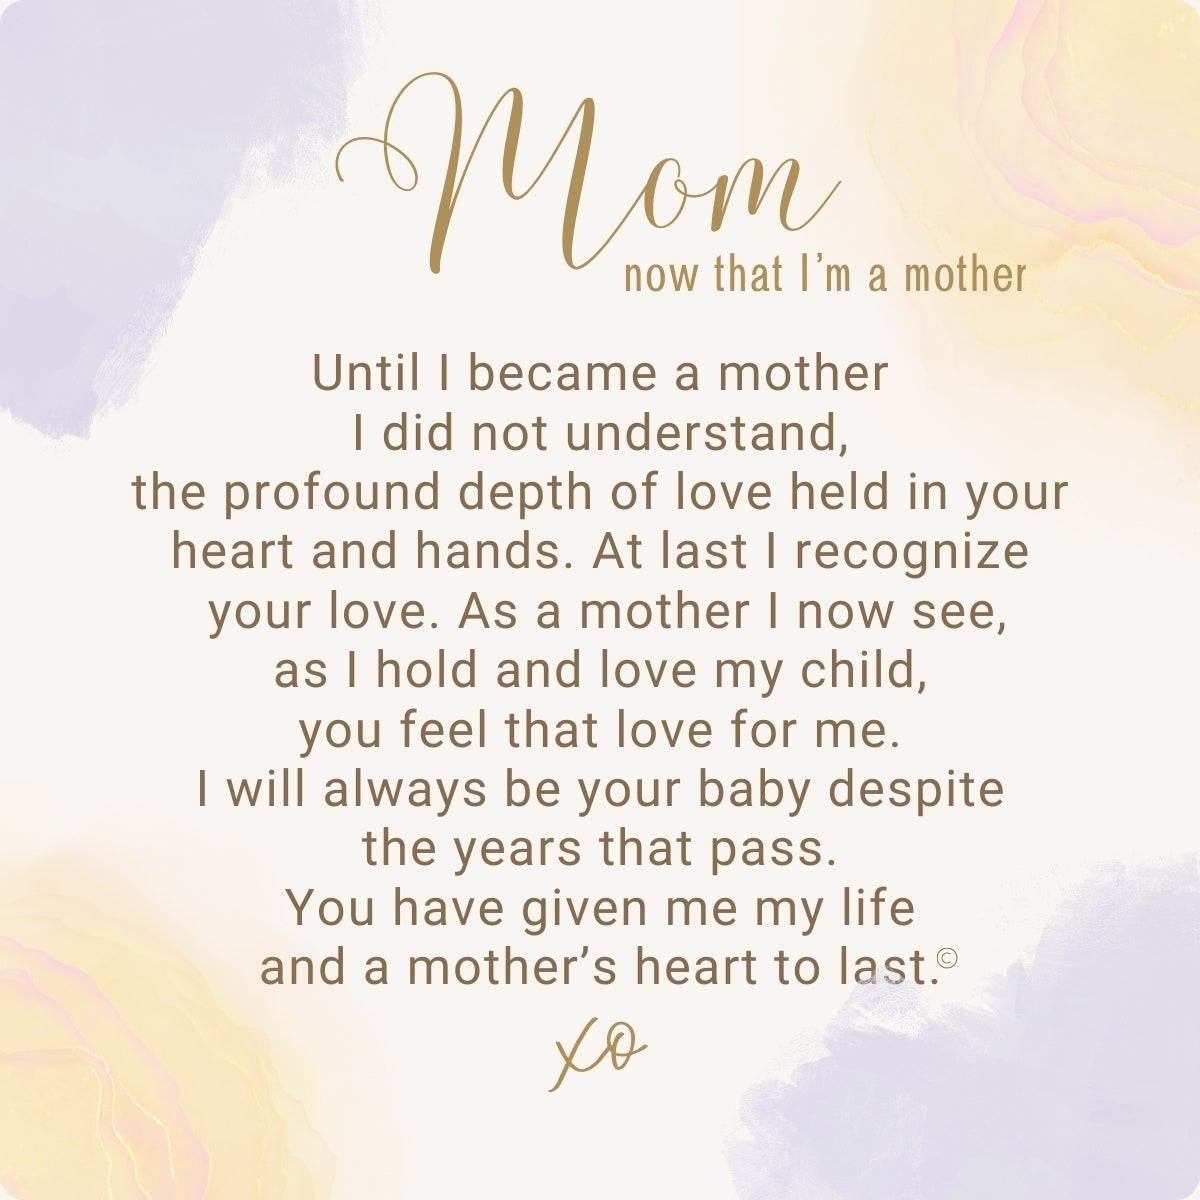 Her Heart for Mom, now that I&#39;m a mother sentiment.